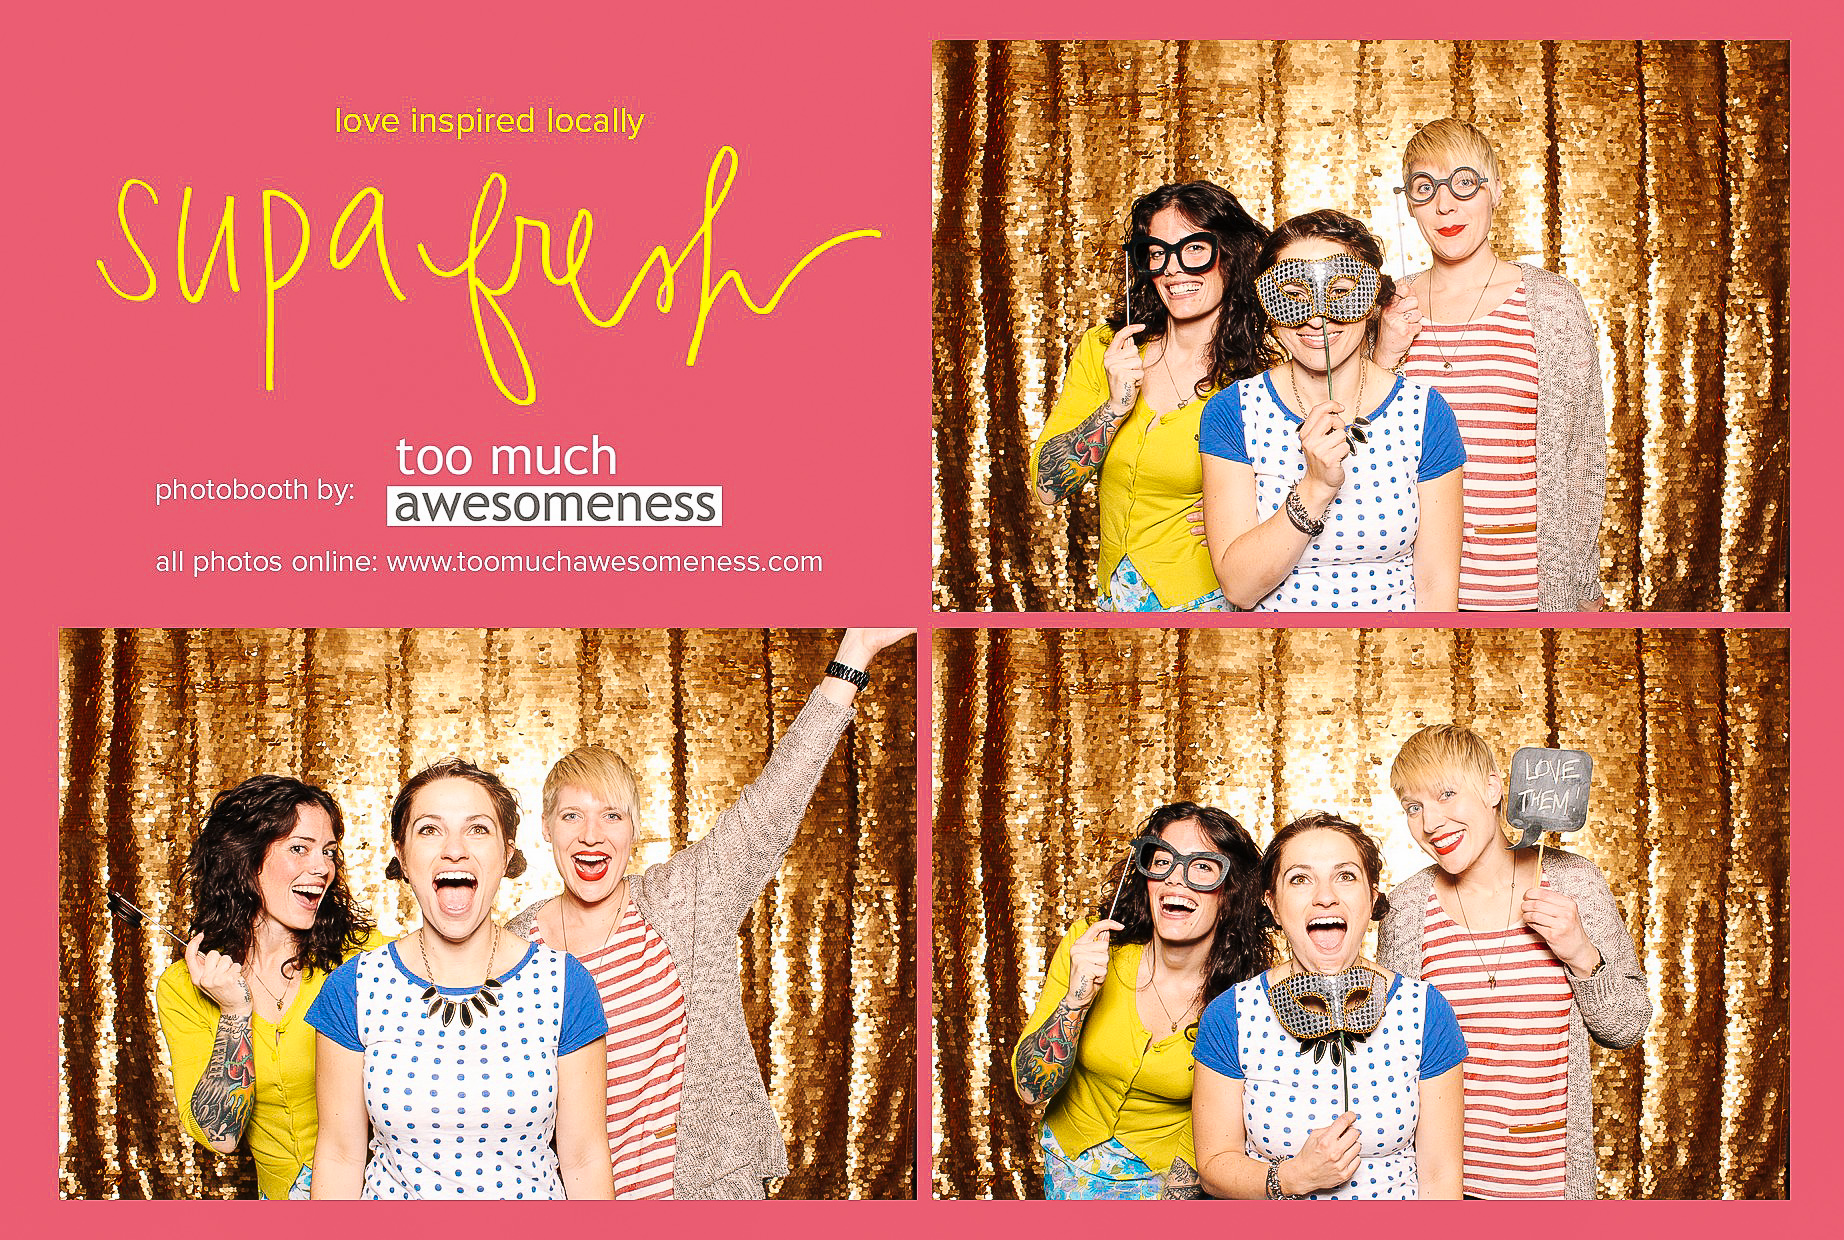 00256-Open Air Photobooth in Cleveland - Too Much Awesomeness.jpg